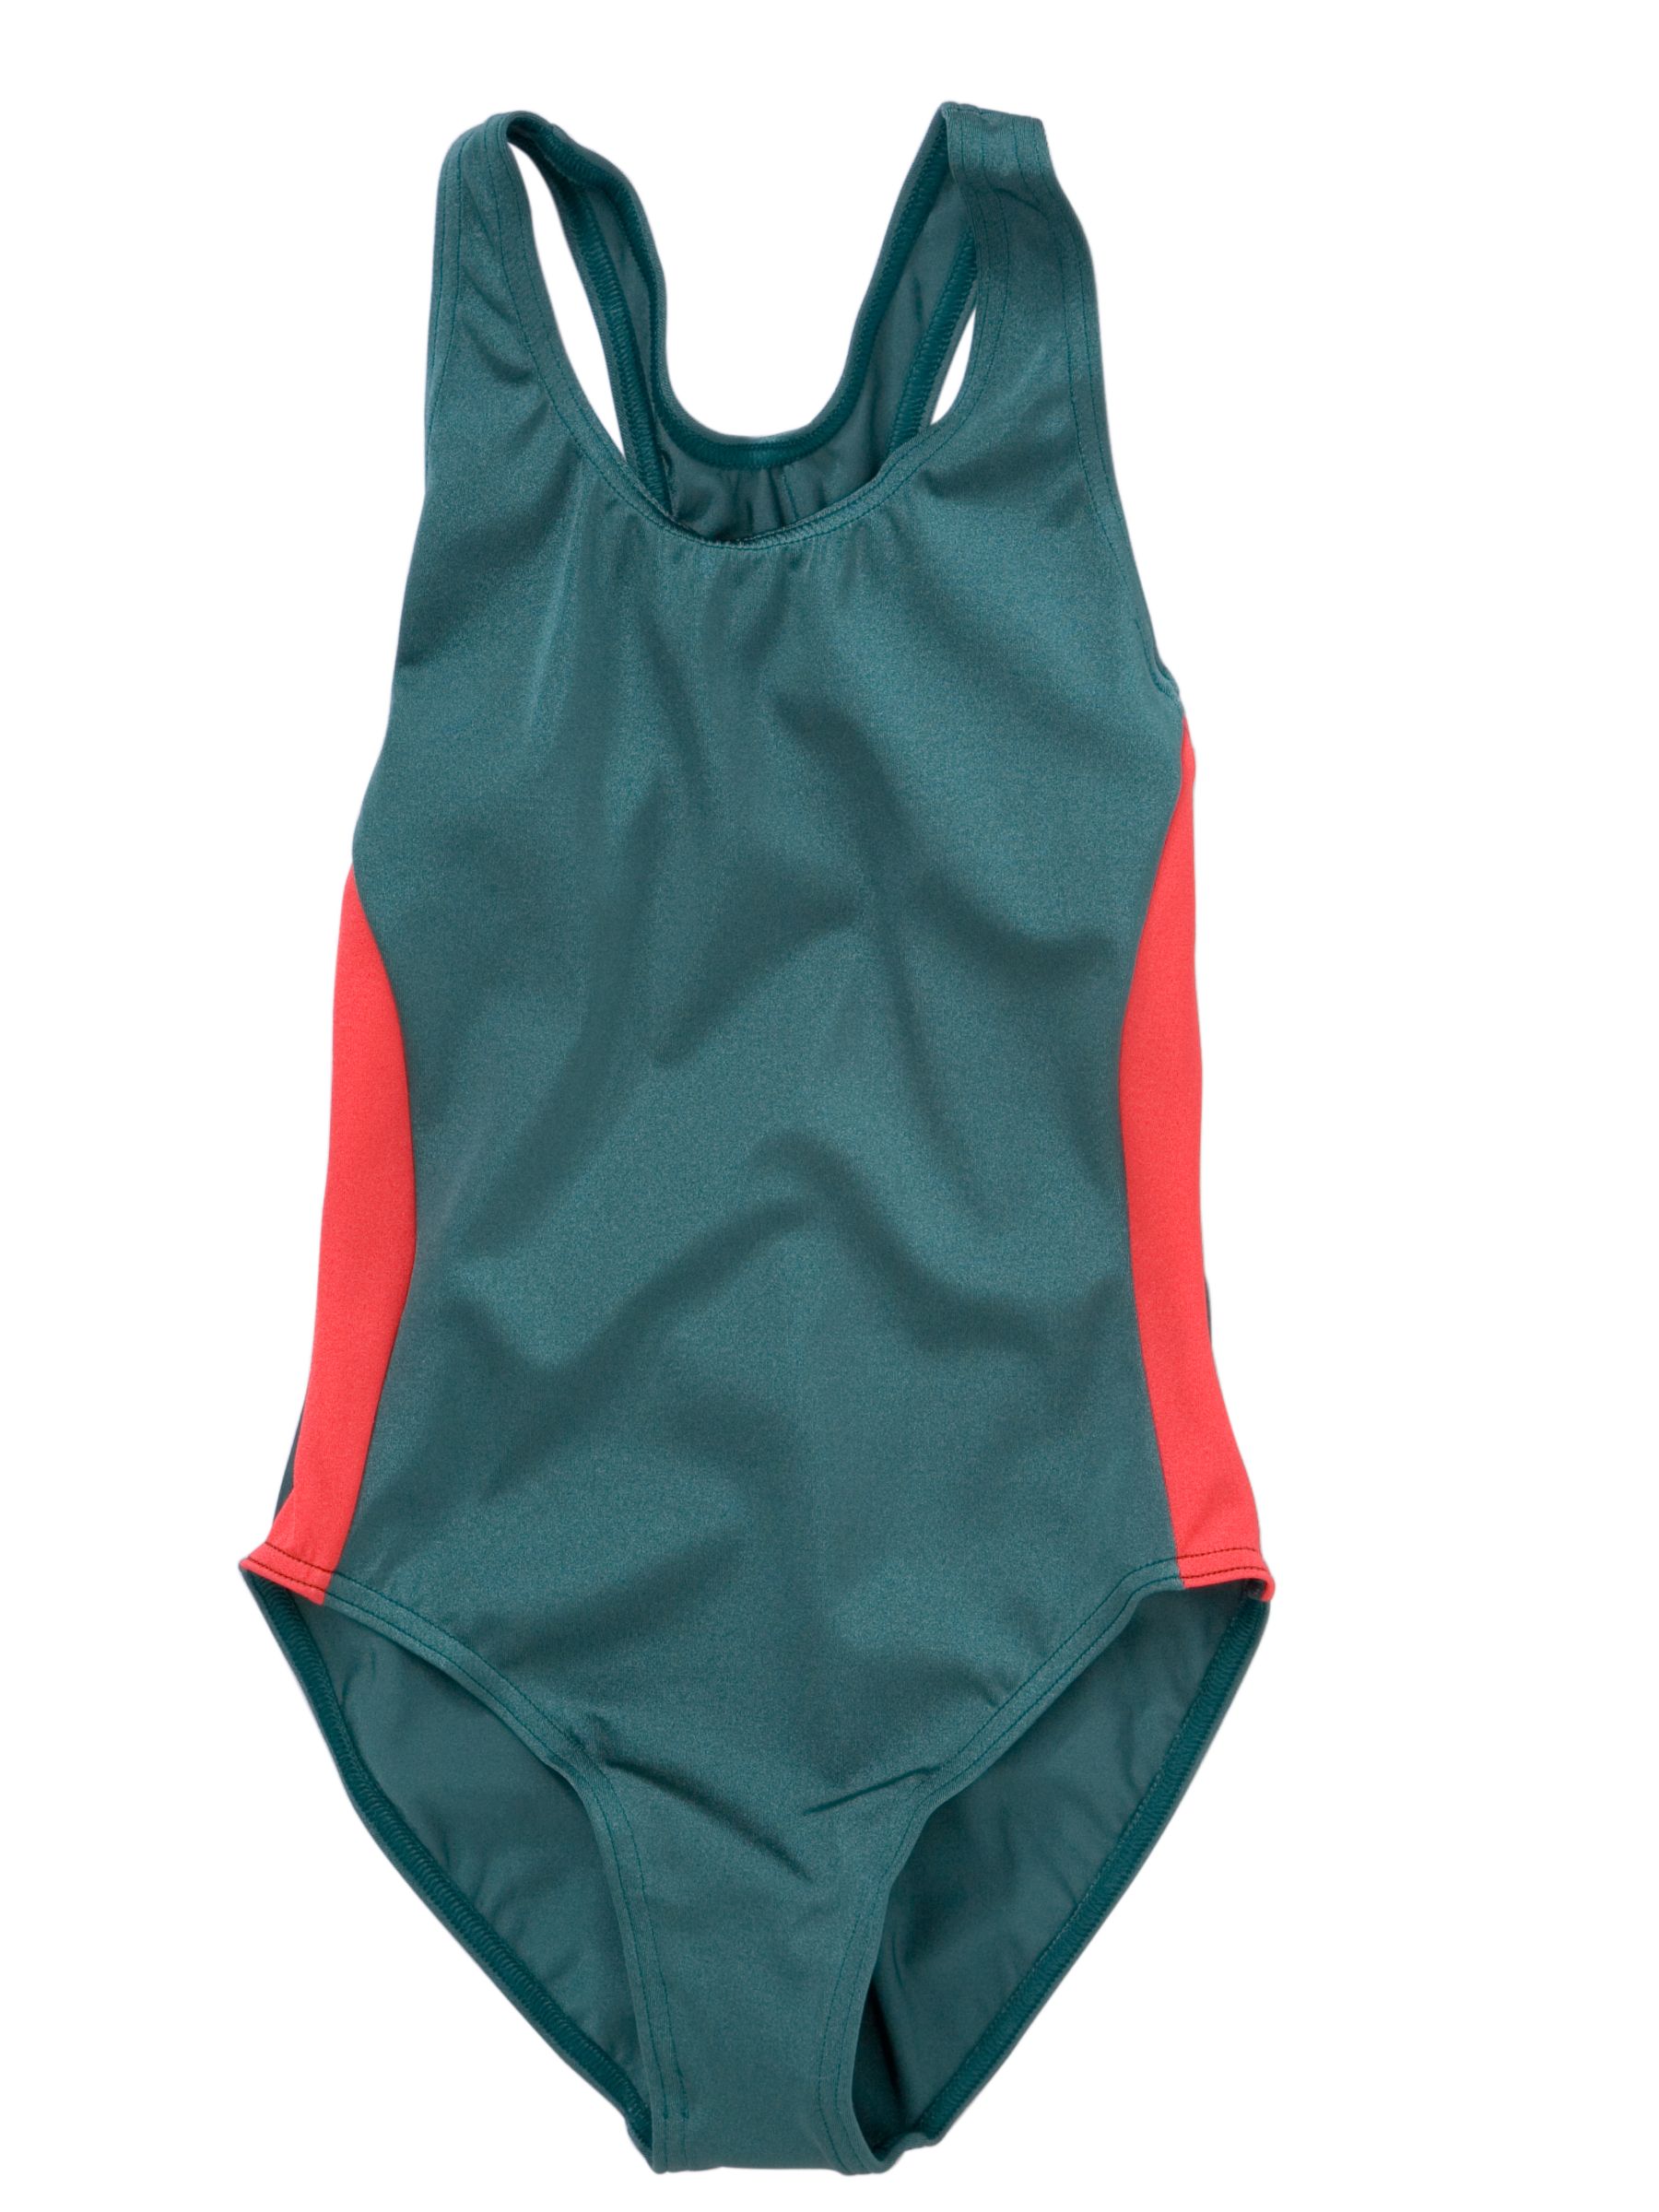 Girls Swimsuit, Green/red